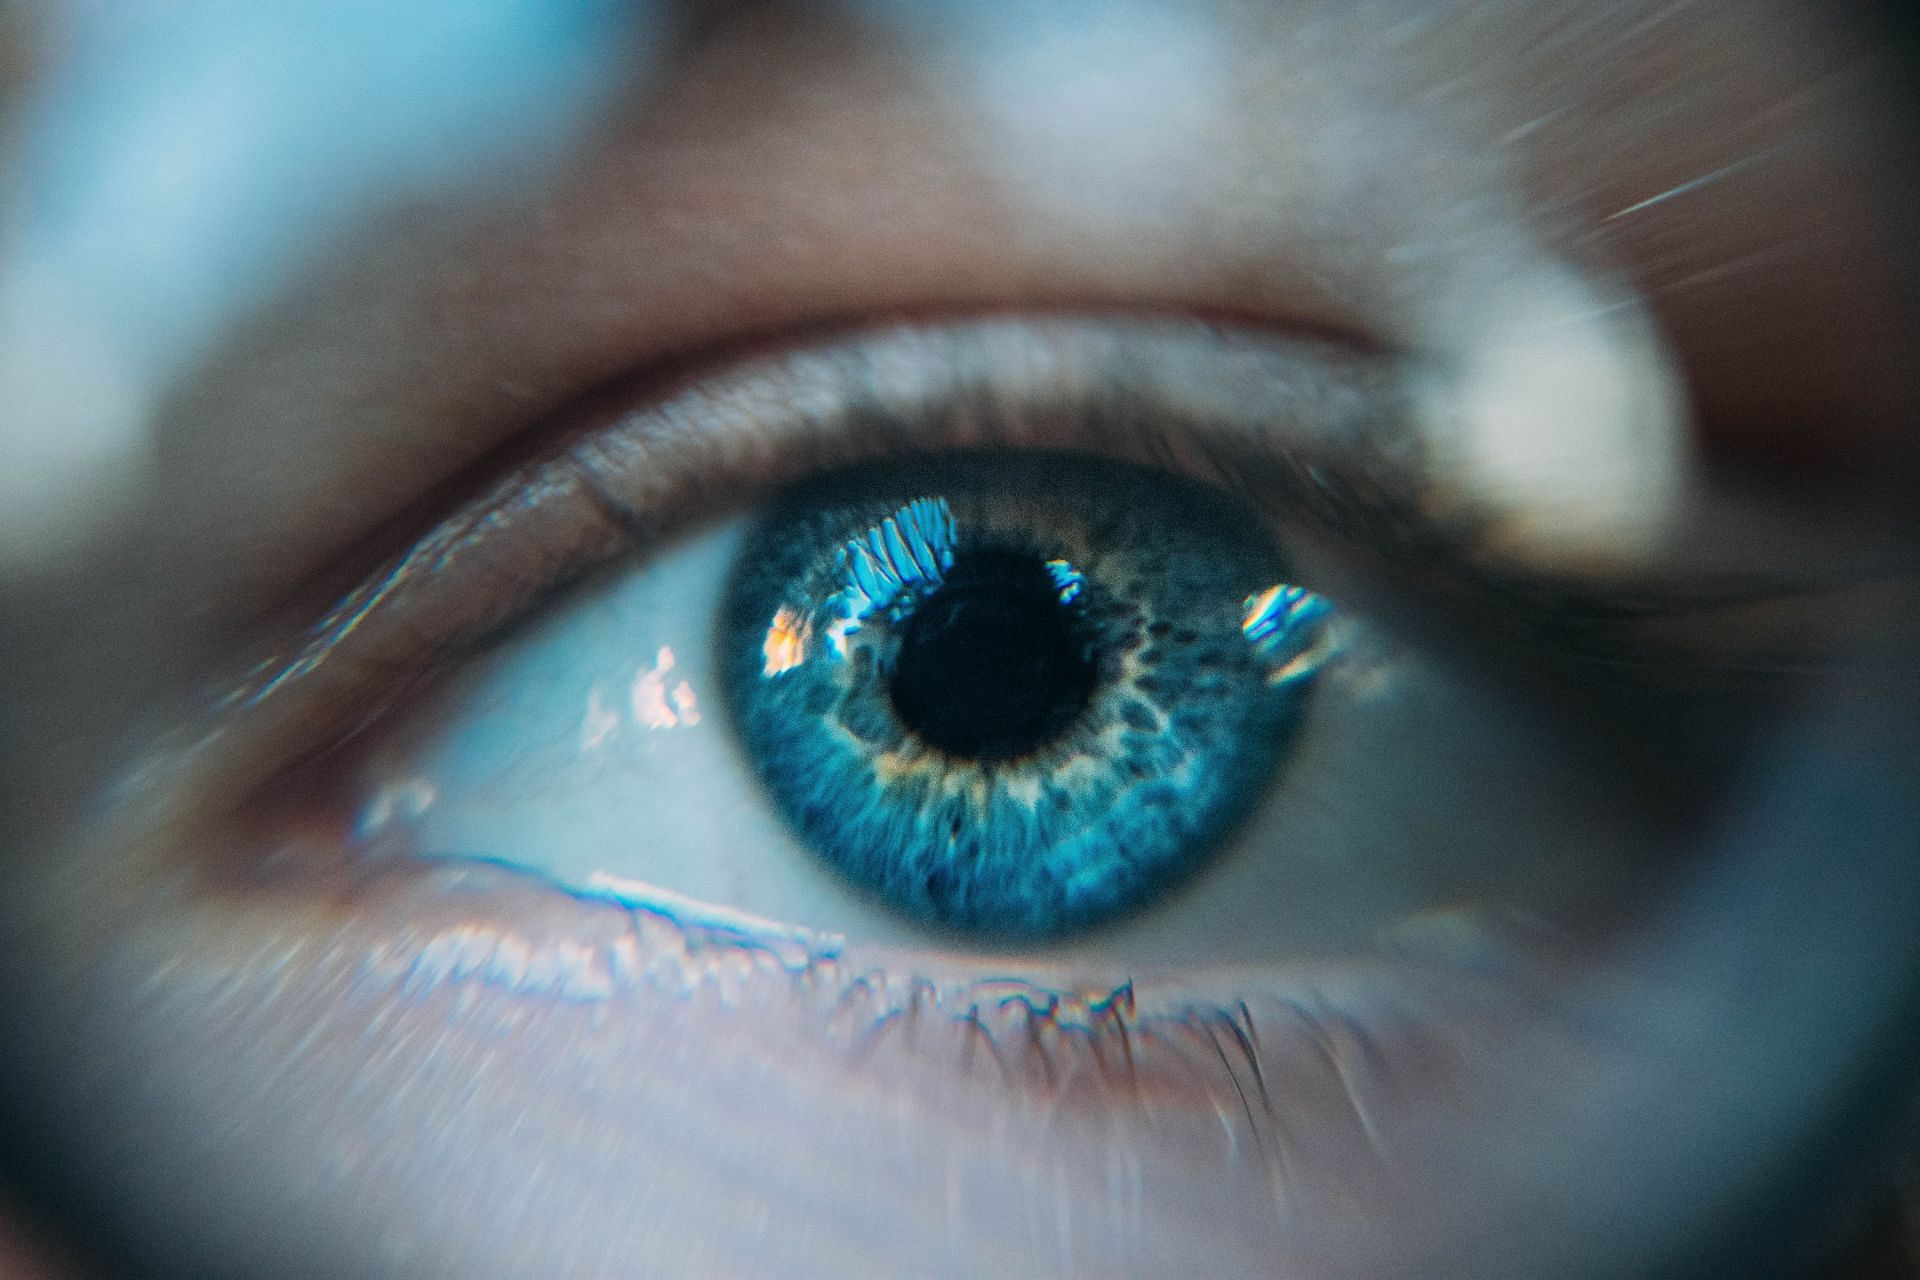 Eye worm infection can result in painful itching. (Image via Unsplash/ Ion Fet)